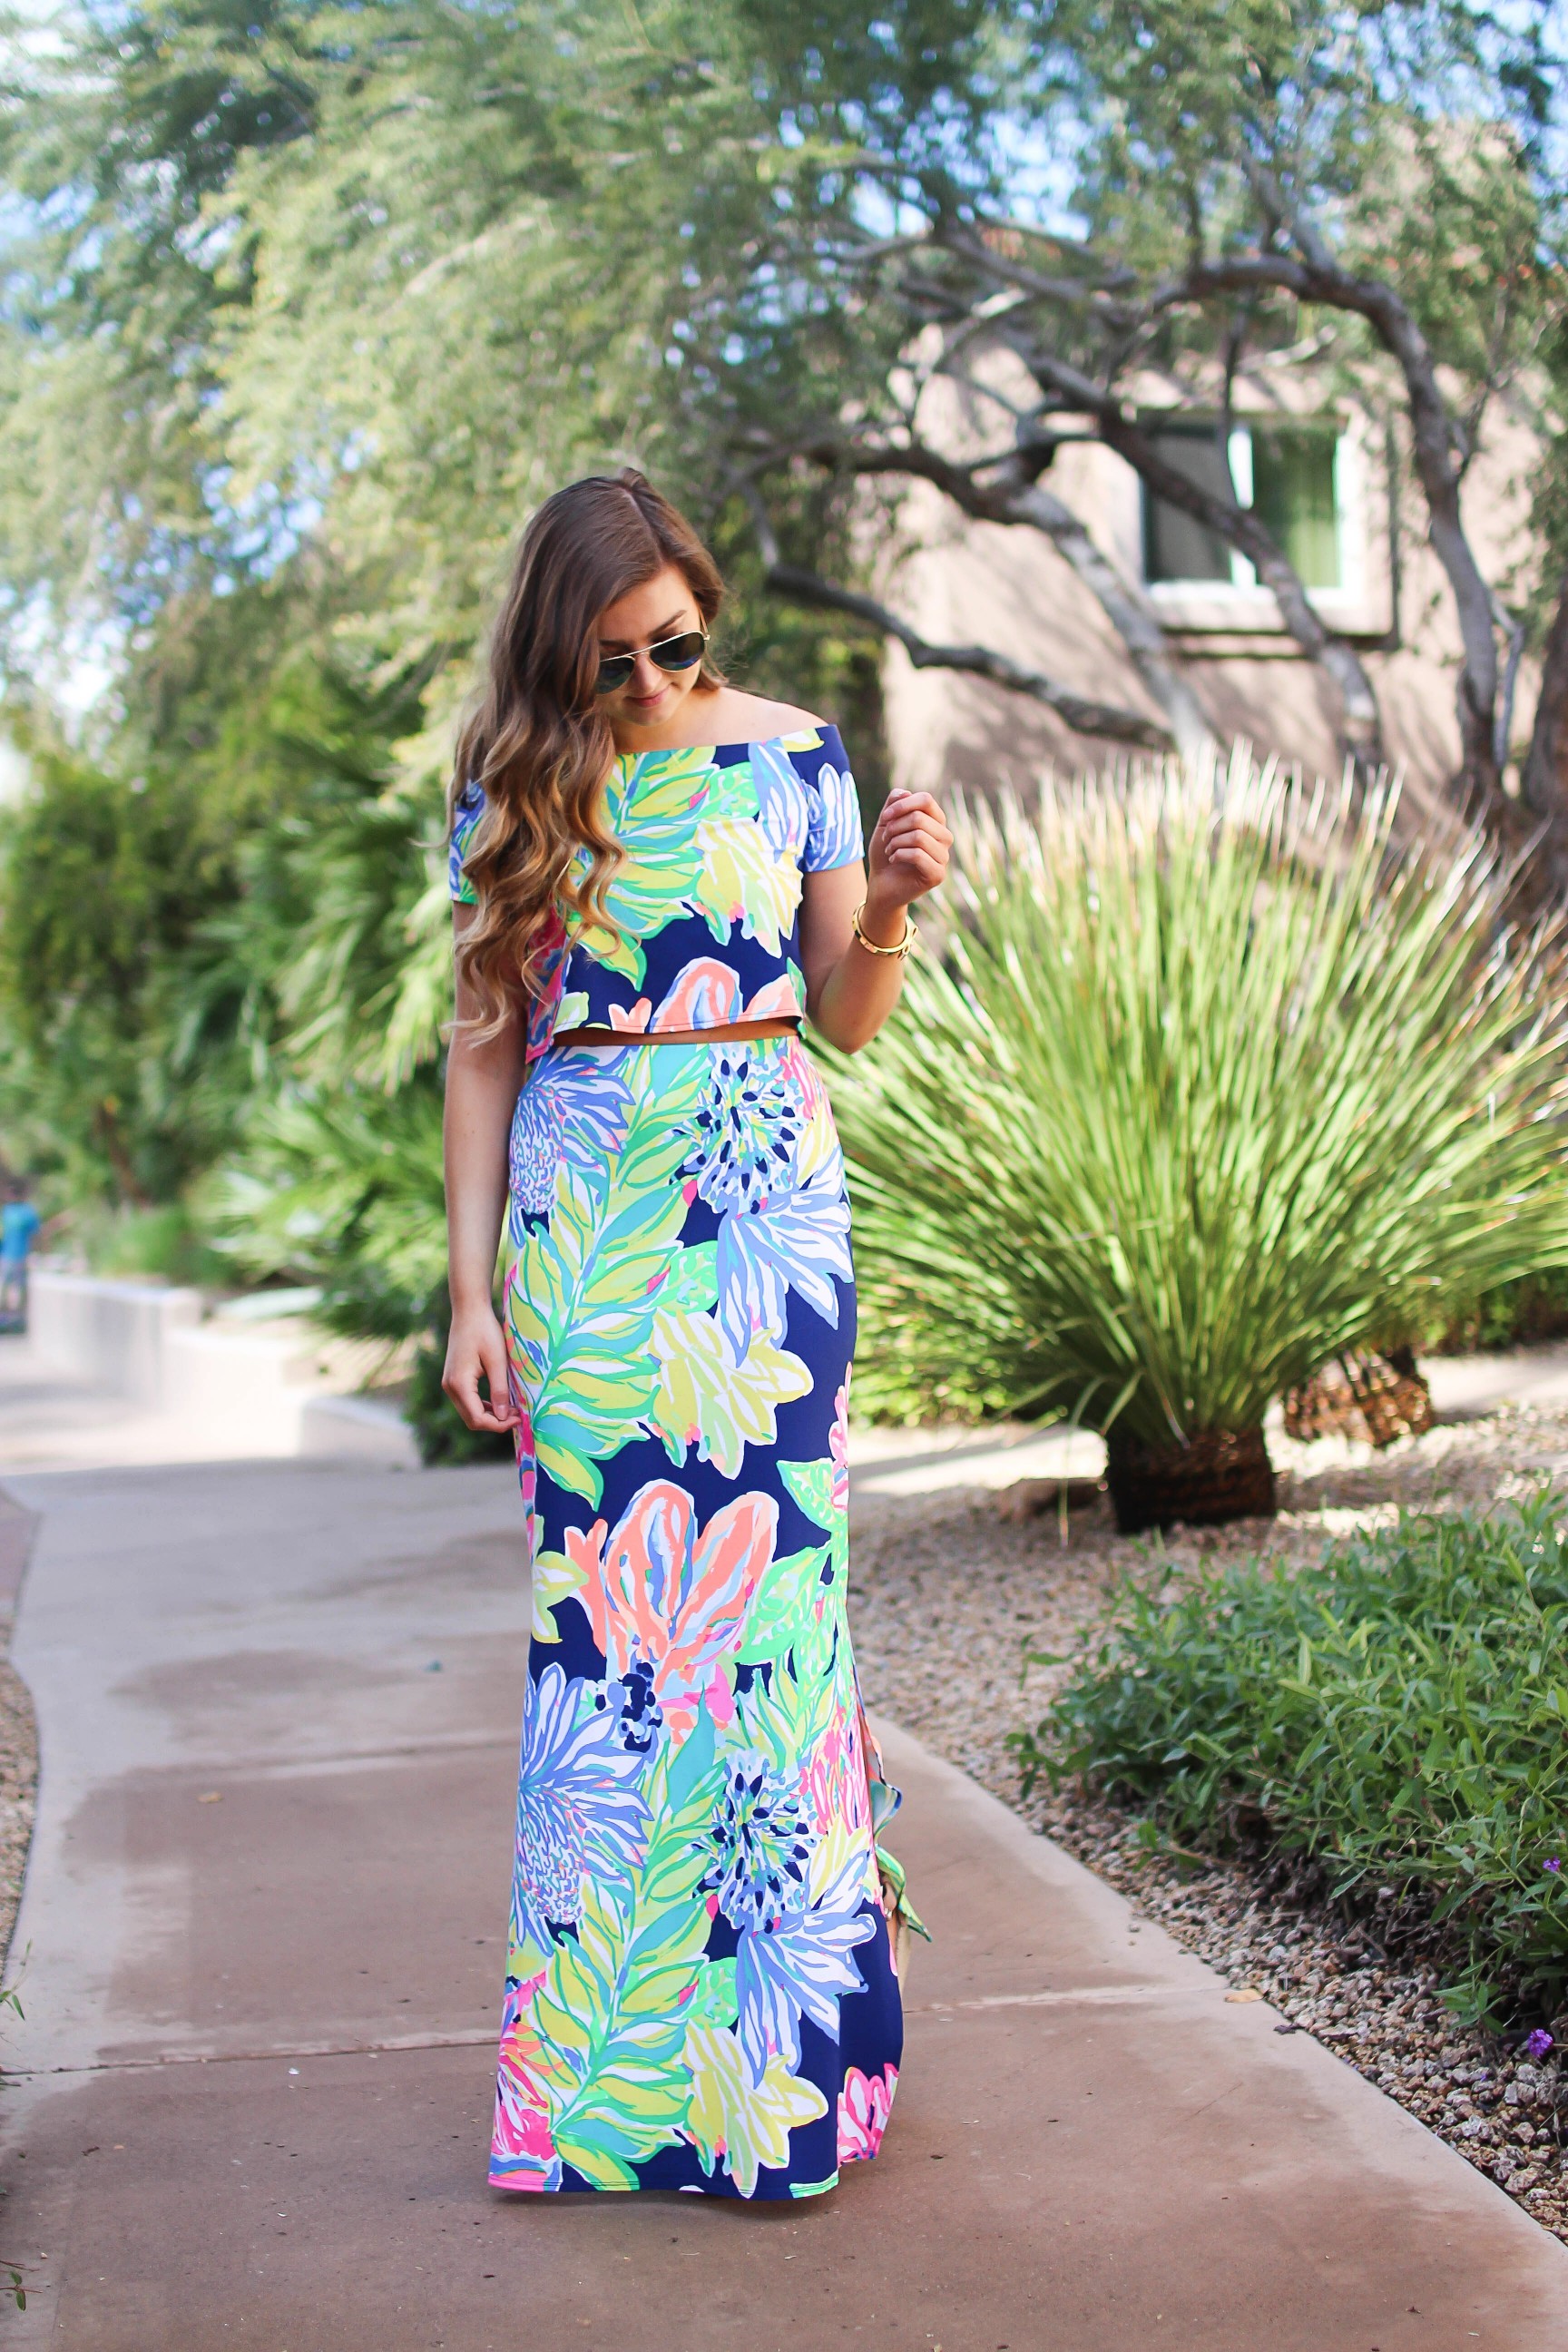 Lilly Pulitzer two piece maxi dress in Navy Travelers Palm. I love everything in the Resort Wear 365 collection this year! I paired this maxi dress with my favorite wedges and gold bangle! By Lauren Lindmark on dailydoseofcharm.com daily dose of charm